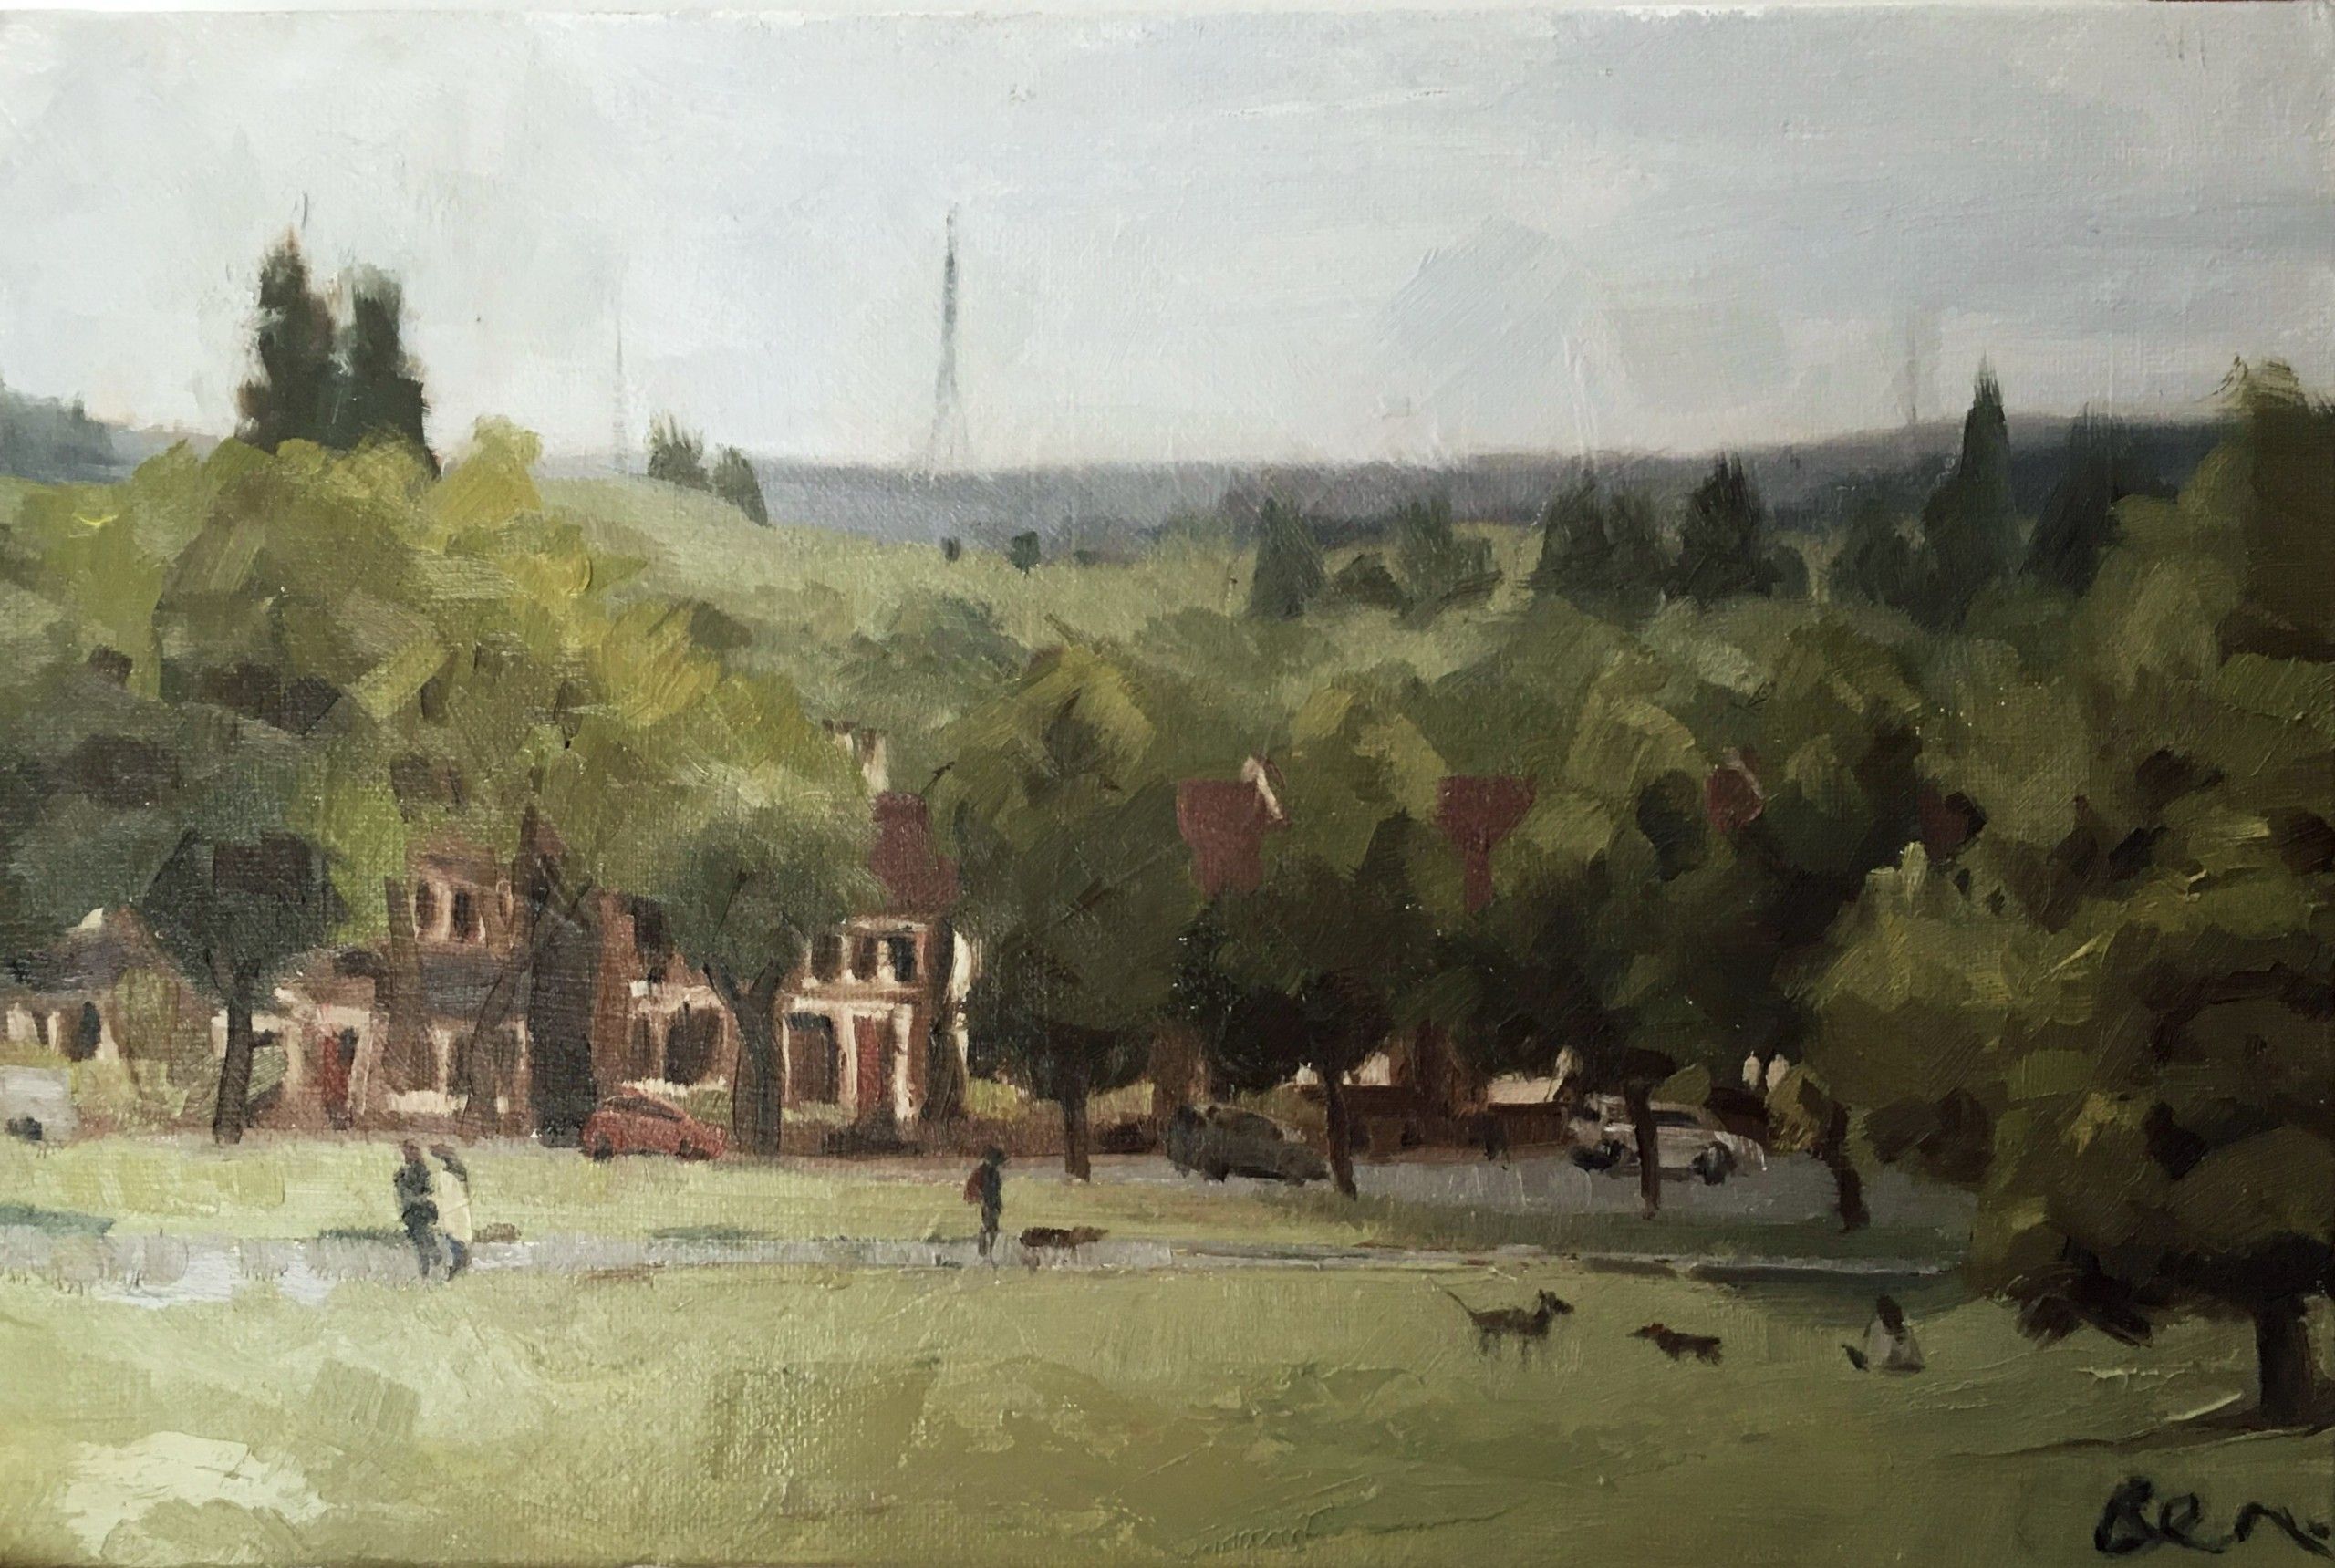 Hilly Fields 2 by Benedict Flanagan